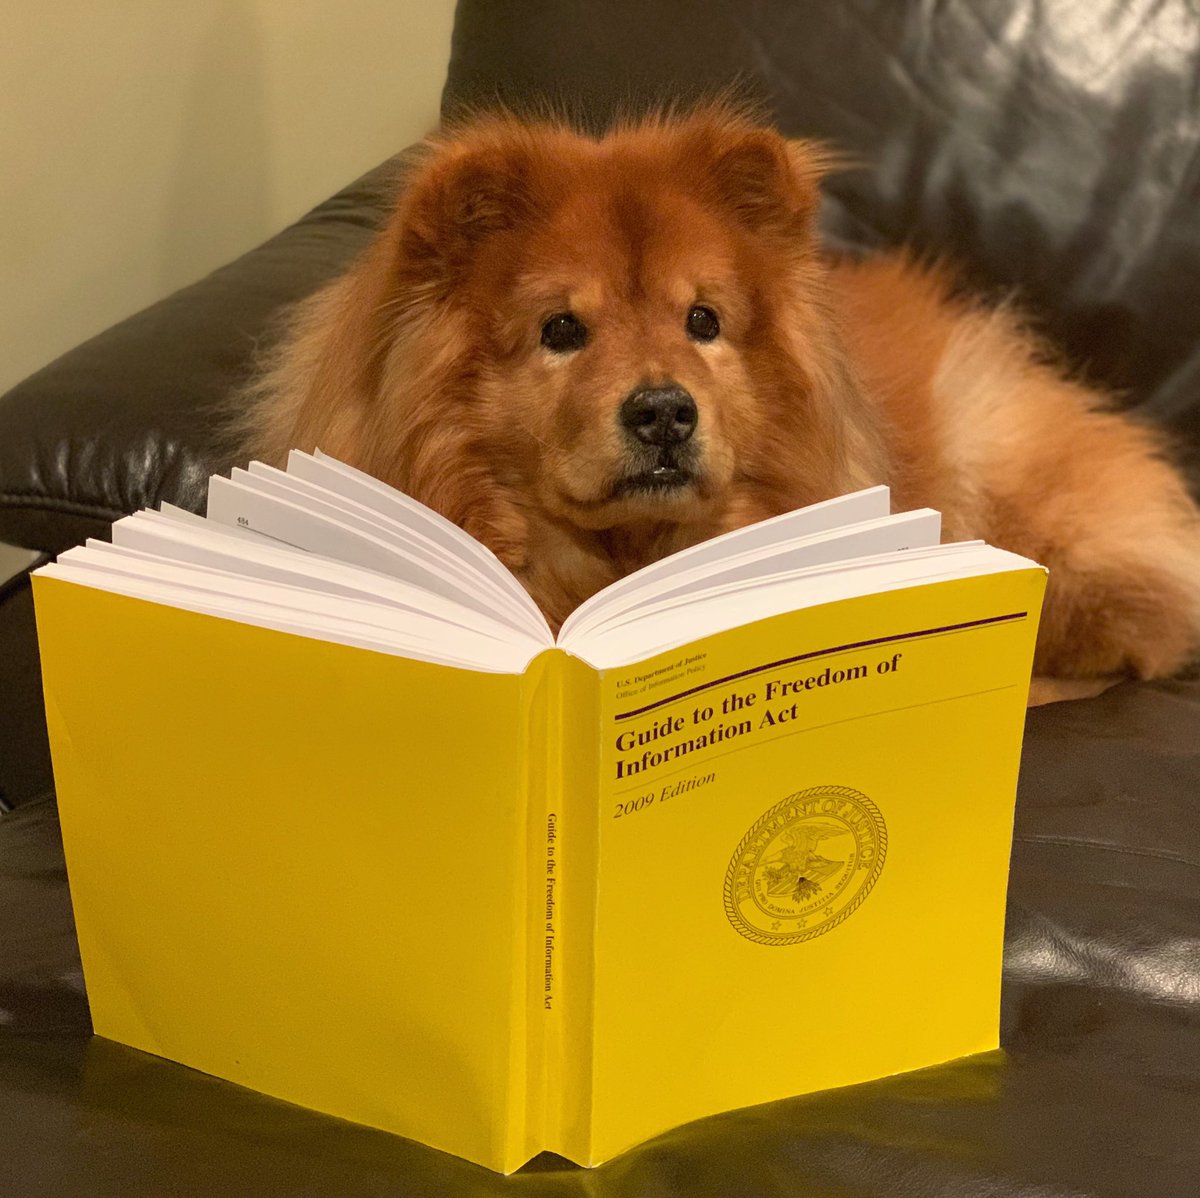 Meet Izzy. She’s trying to figure out how to submit a Freedom of Information Act request to find out if she’s a very good girl.  This floof is a h*cking genius.

#weratedogs #doj #foia #freedomofinformationact #departmentofjustice #lawyerdog #disclosure #ratemydog